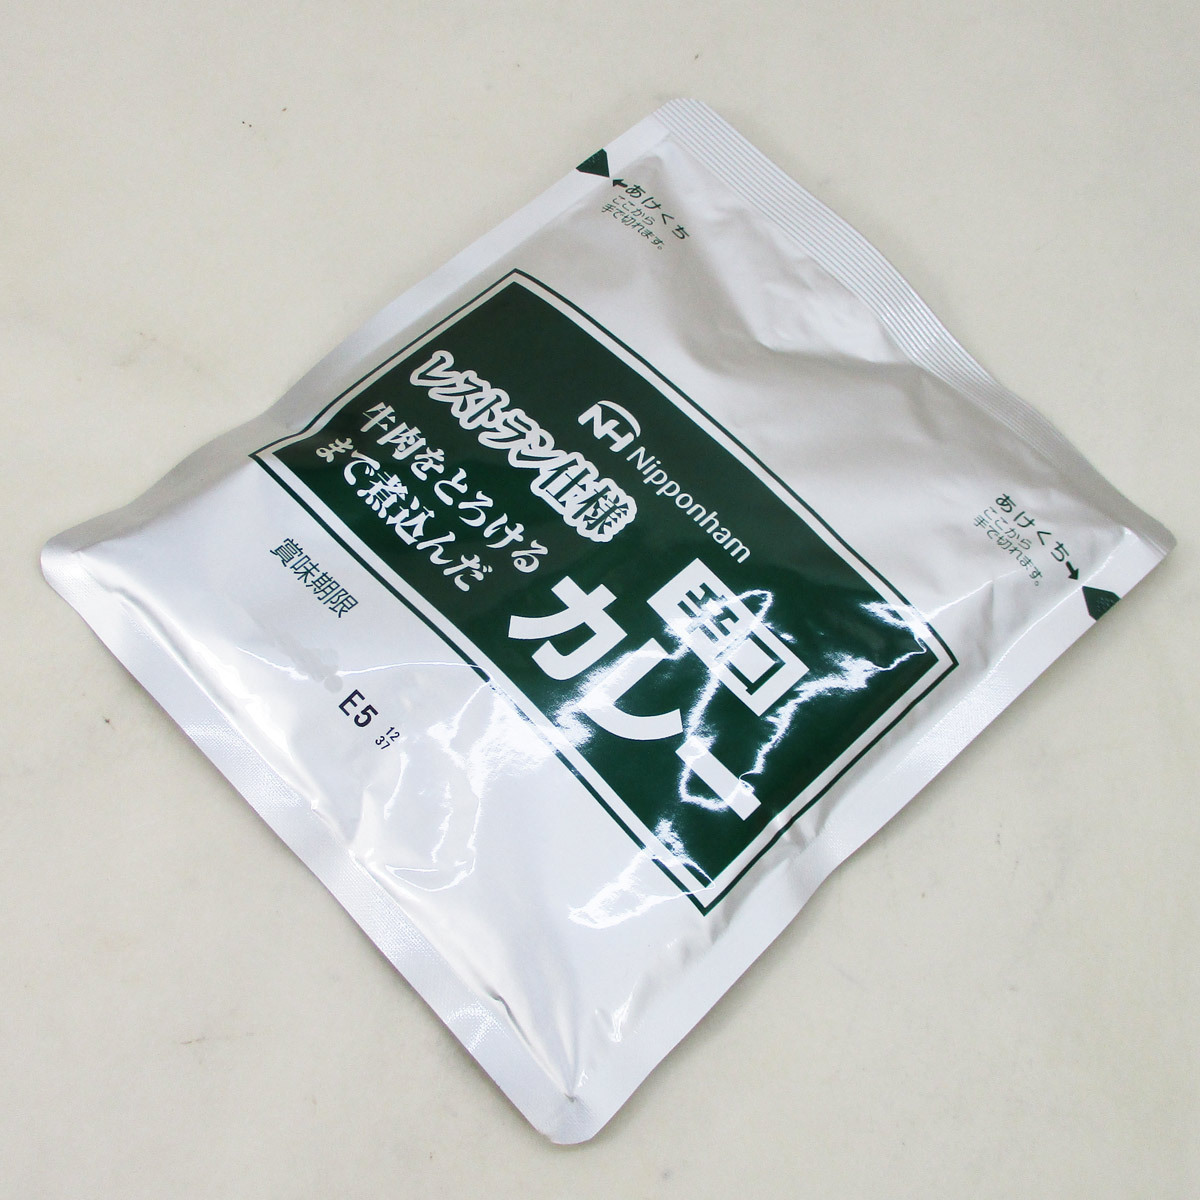  including in a package possibility retort-pouch curry restaurant specification curry Japan ham ..x4 food set 